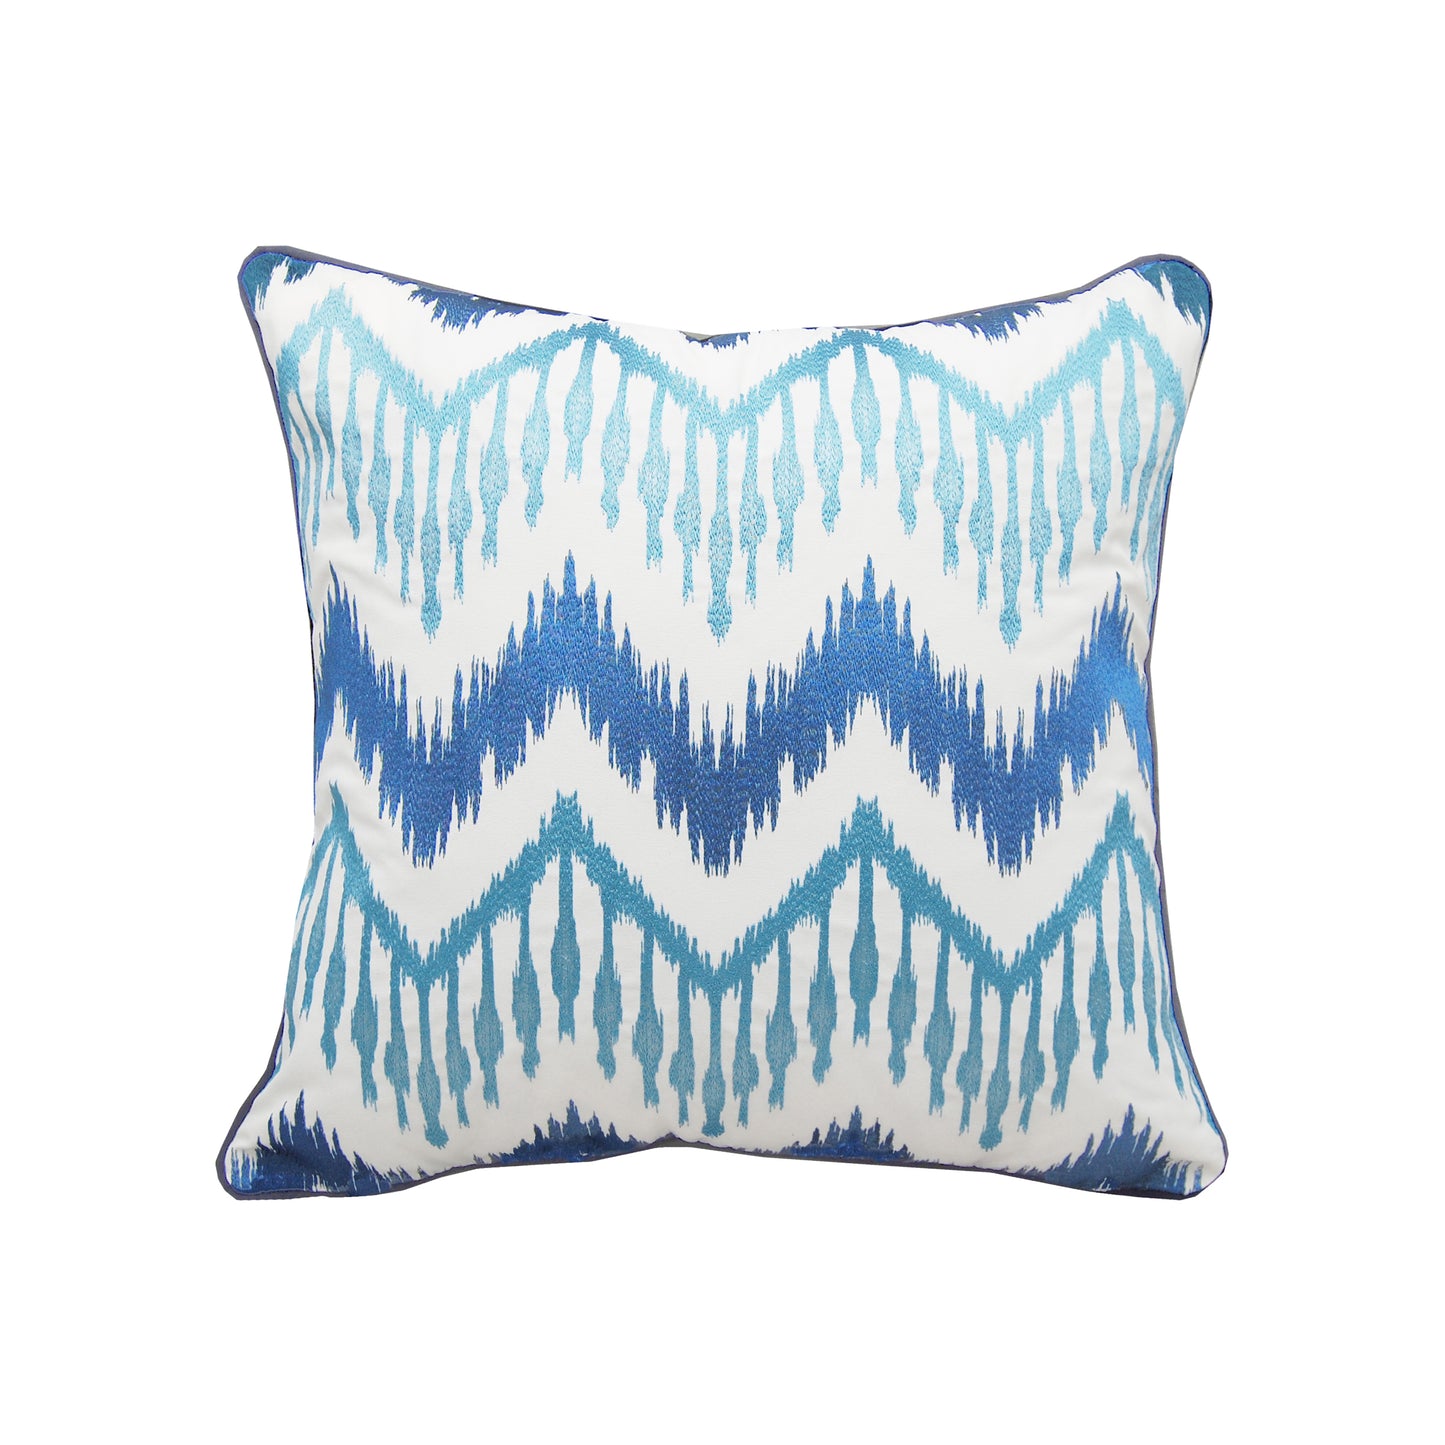 Ikat design in sea glass and denim embroidery on a white ground; blue piped edging.